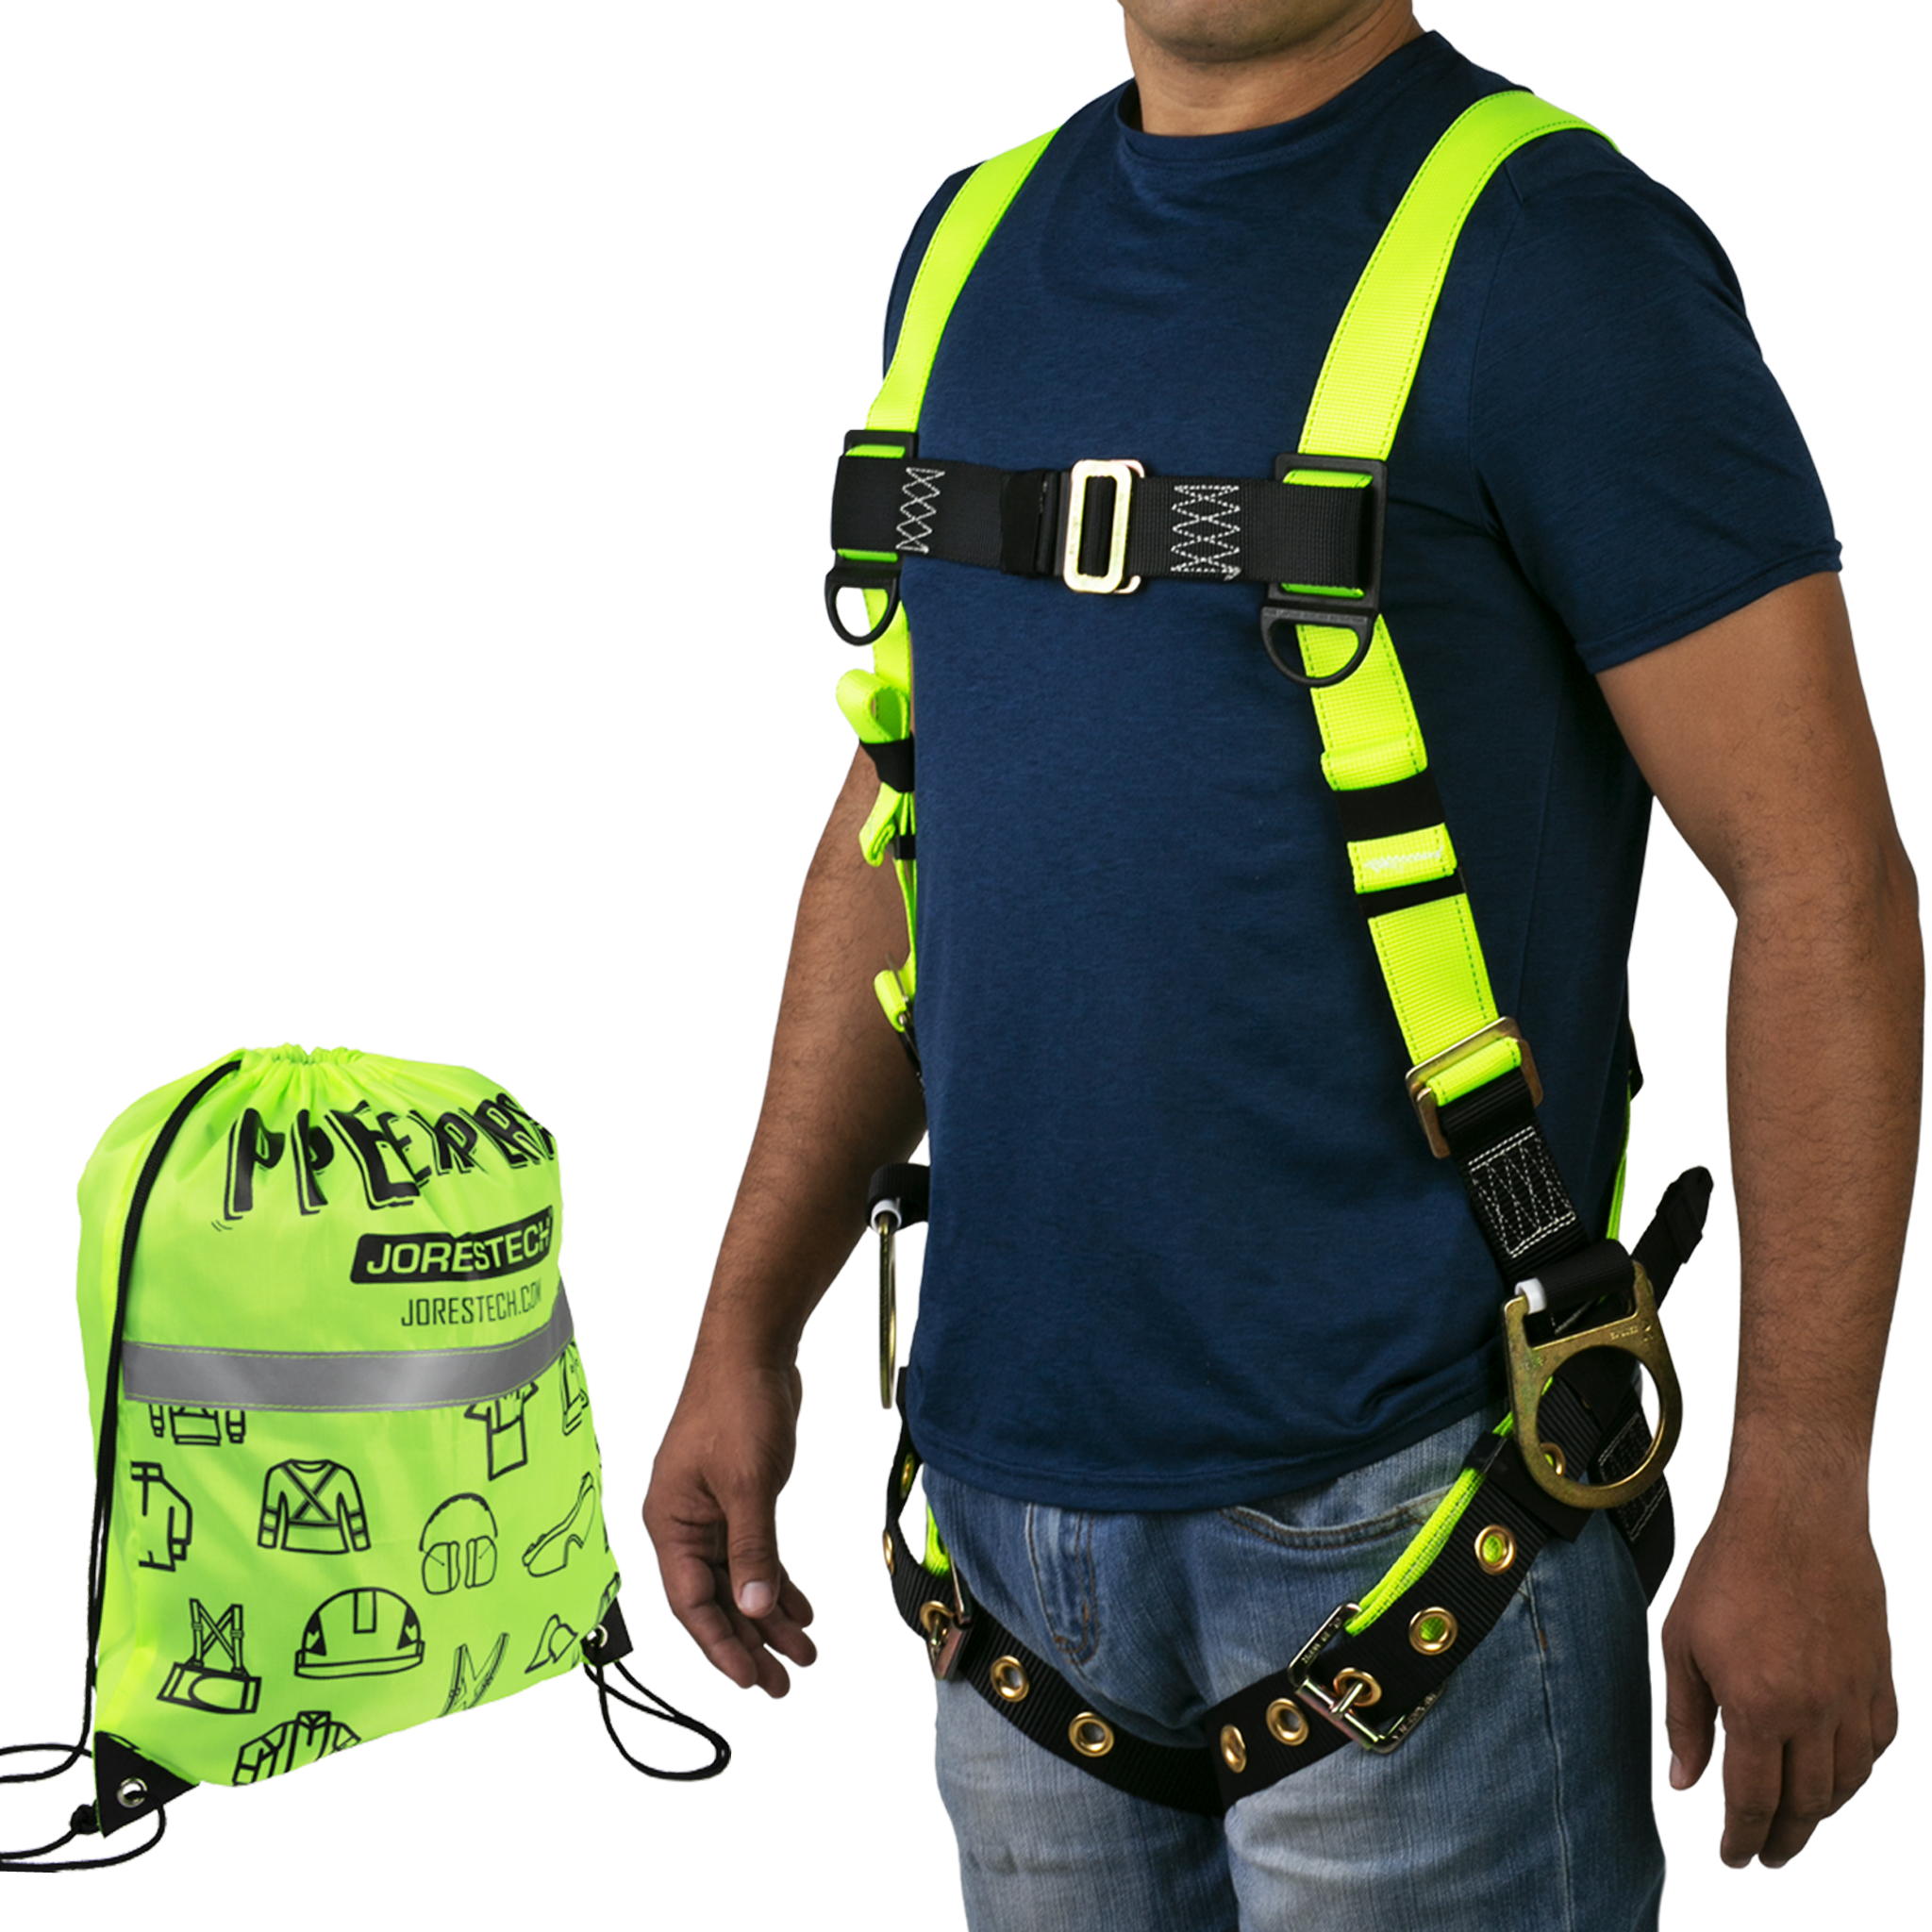 When to Replace a Full Body Safety Harness